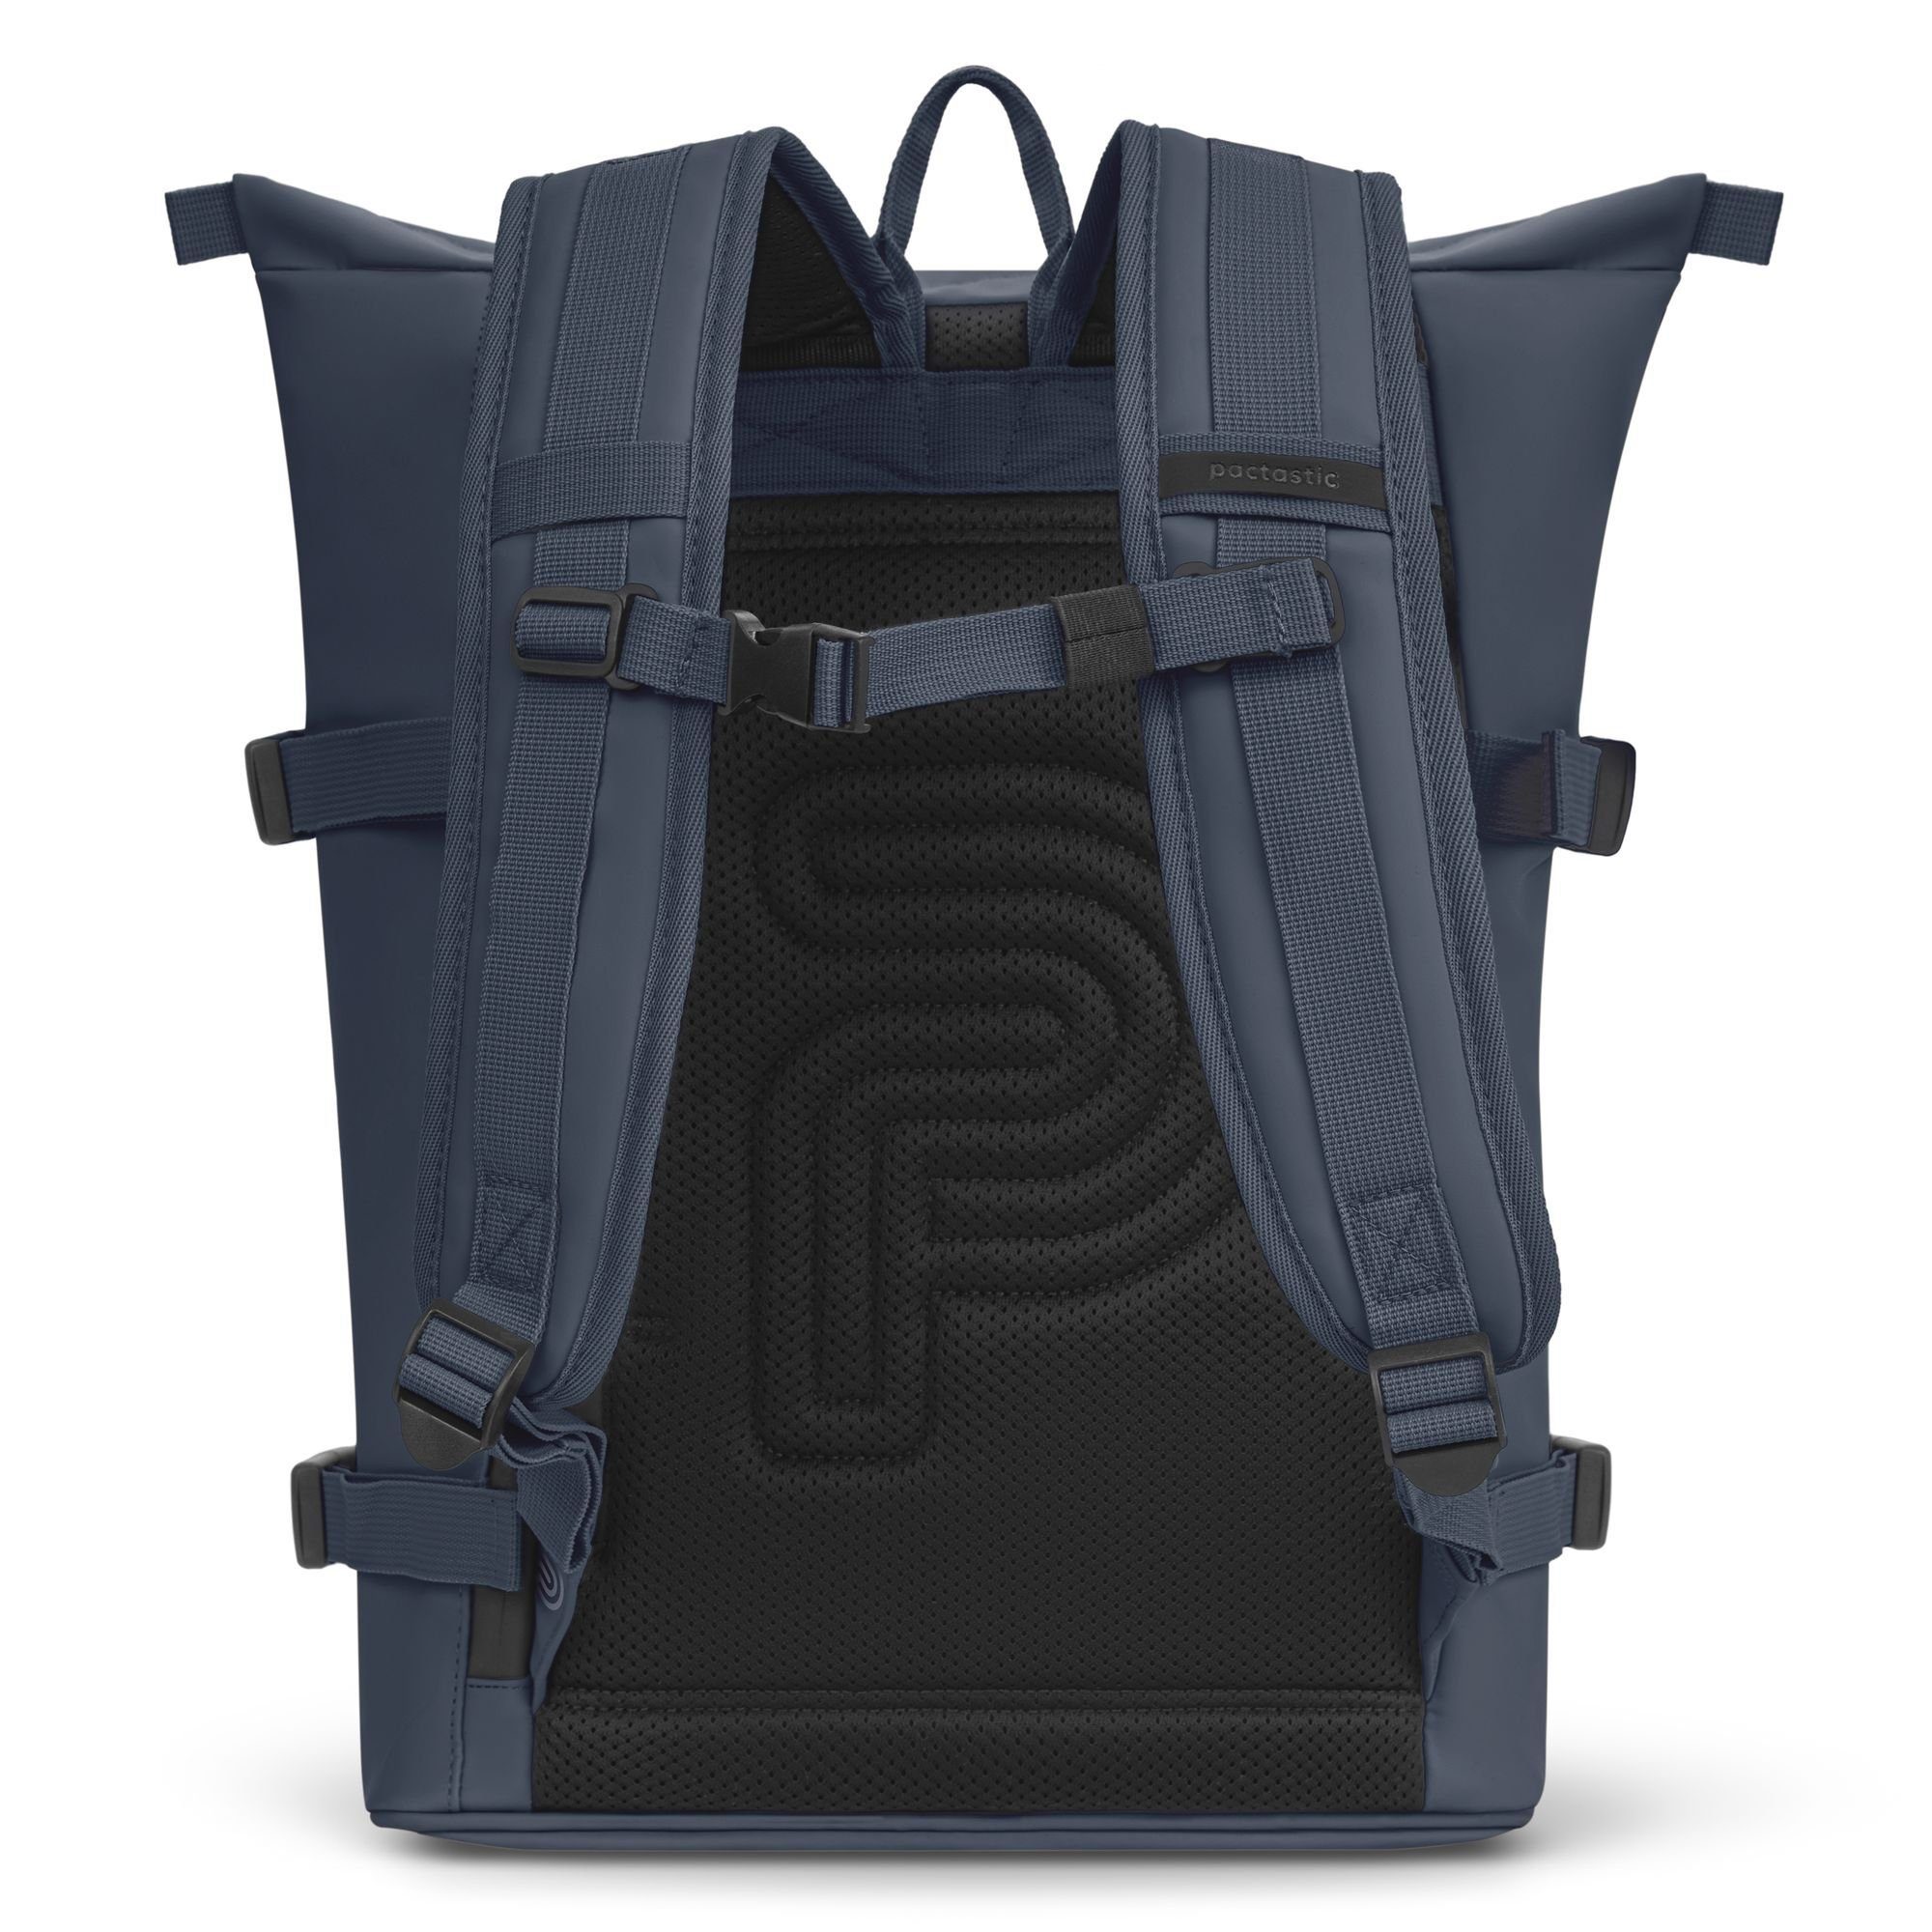 Daypack dark Veganes Tech-Material blue Pactastic Collection, Urban